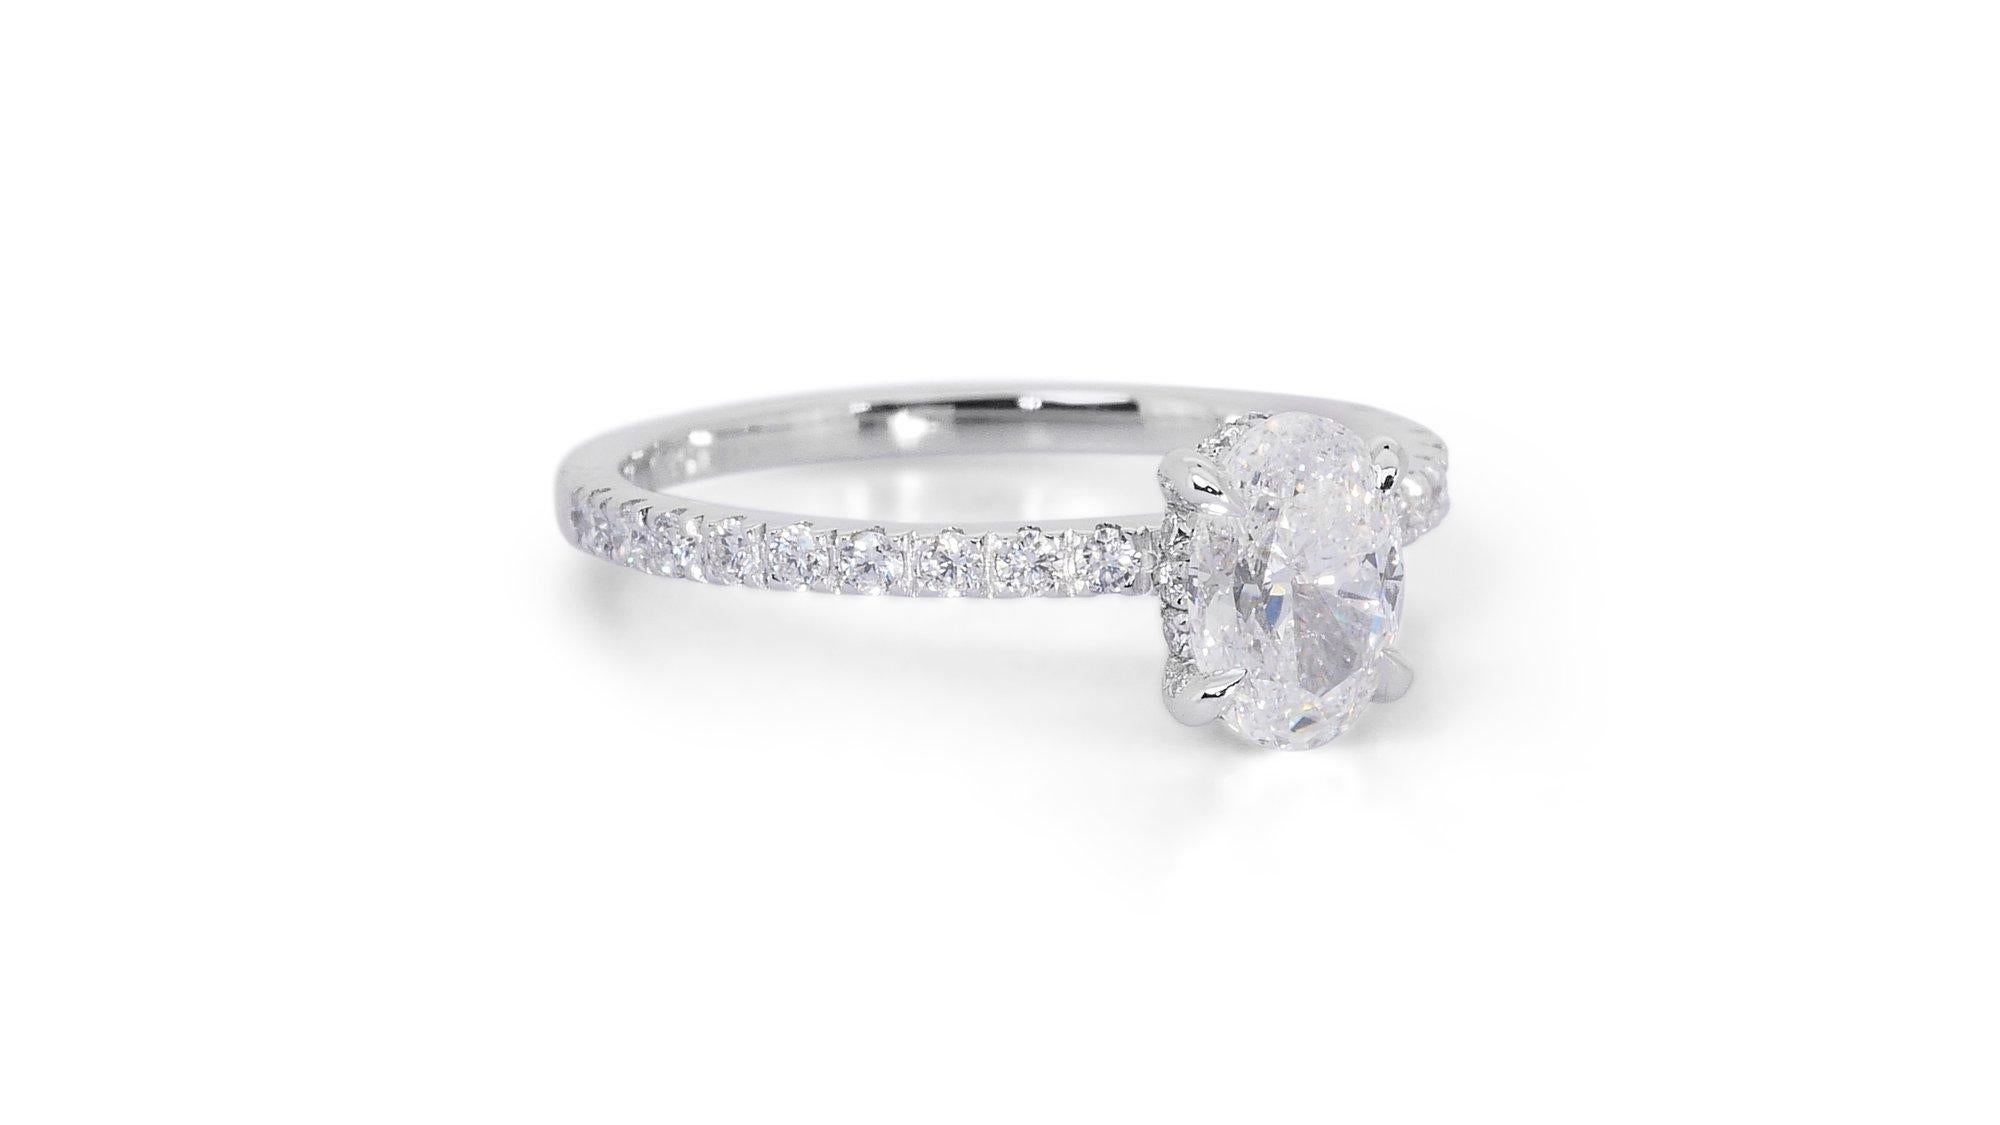 Exquisite 18k White Gold Natural Diamond Pave Ring w/1.26 ct - GIA Certified

Embrace the endless sparkle of this exquisite pave diamond ring, meticulously crafted in gleaming 18k white gold. A mesmerizing oval diamond as the center piece, boasting